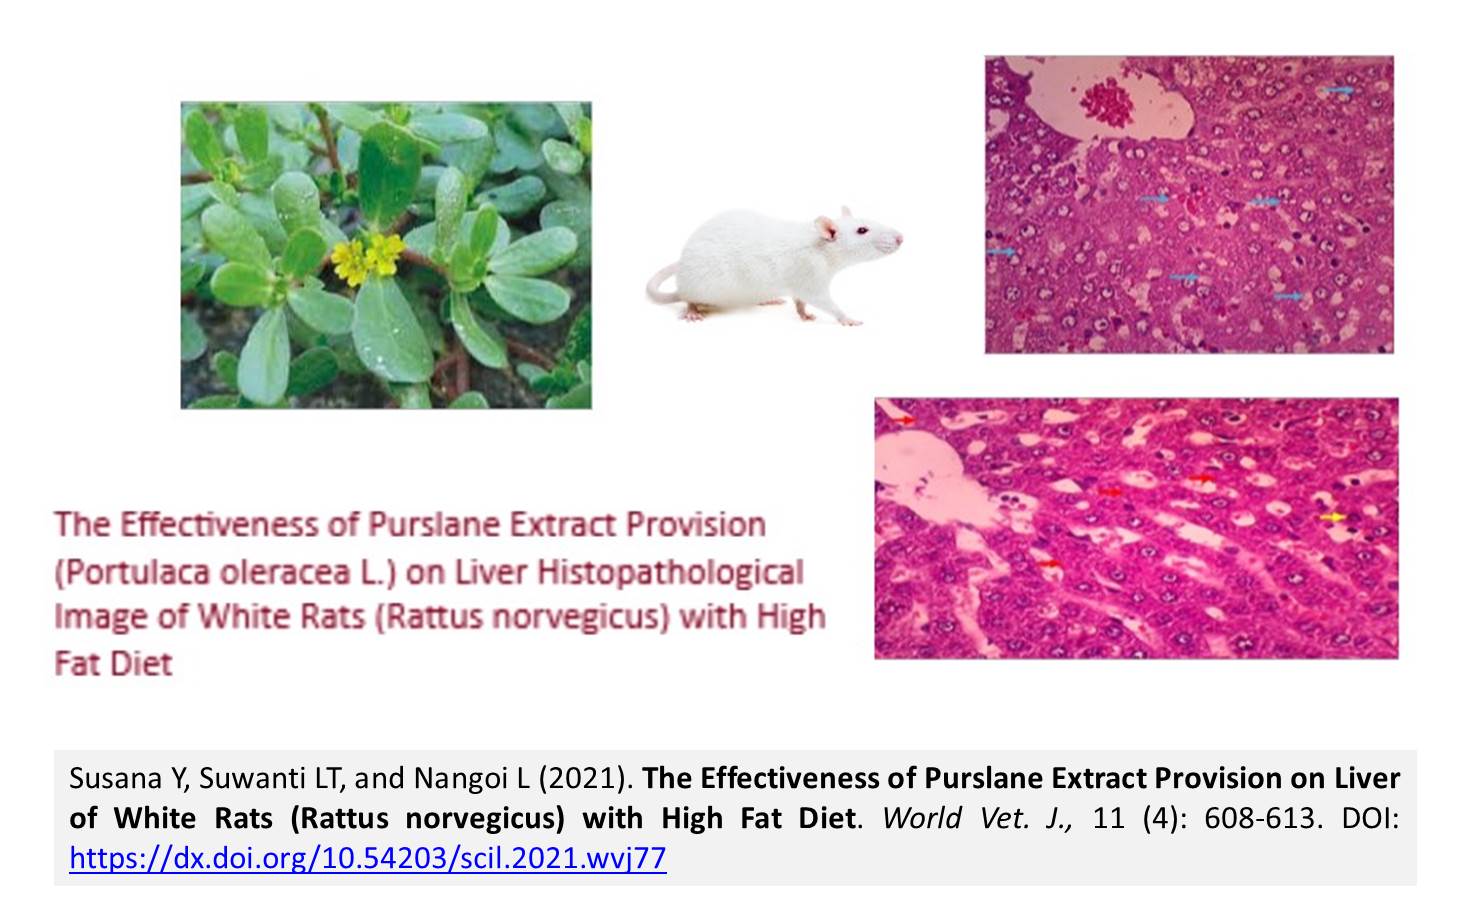 14003Purslane_Extract_Provision_on_Liver_of_White_Rats